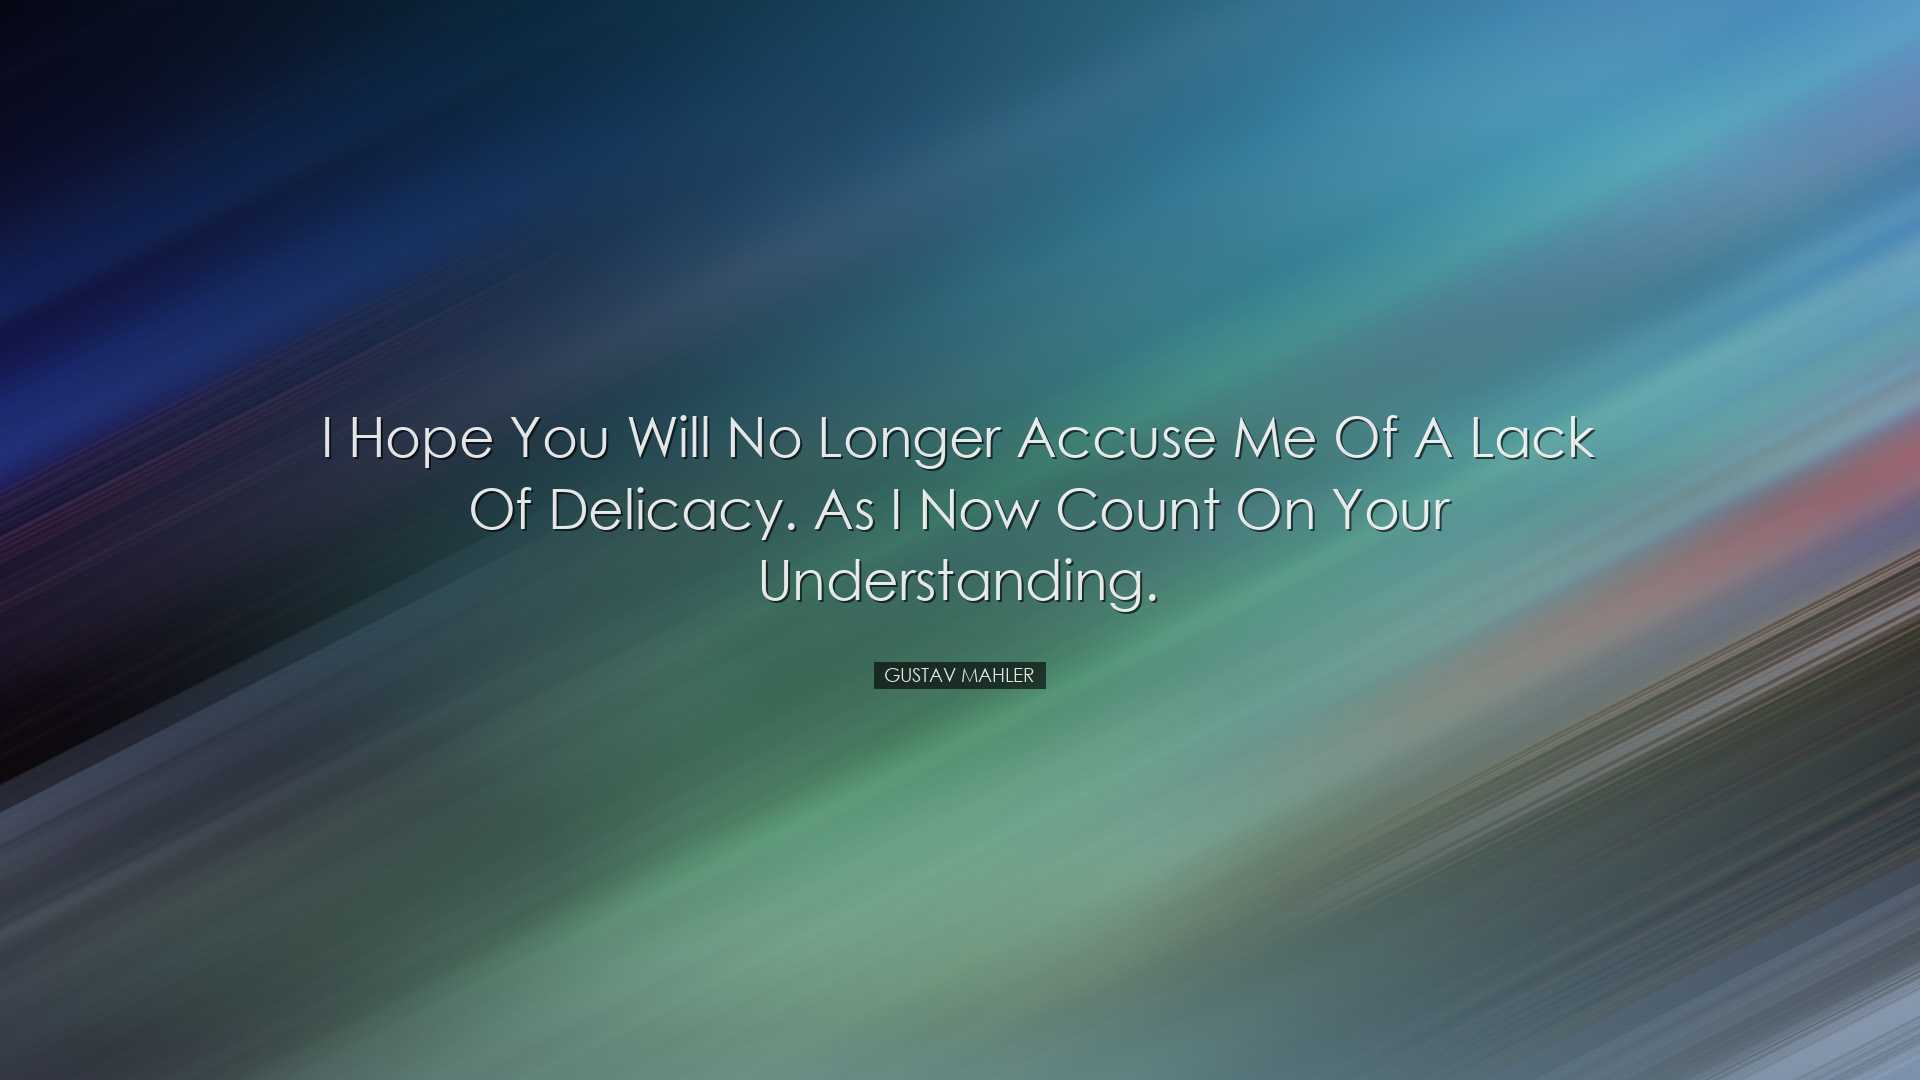 I hope you will no longer accuse me of a lack of delicacy. as I no